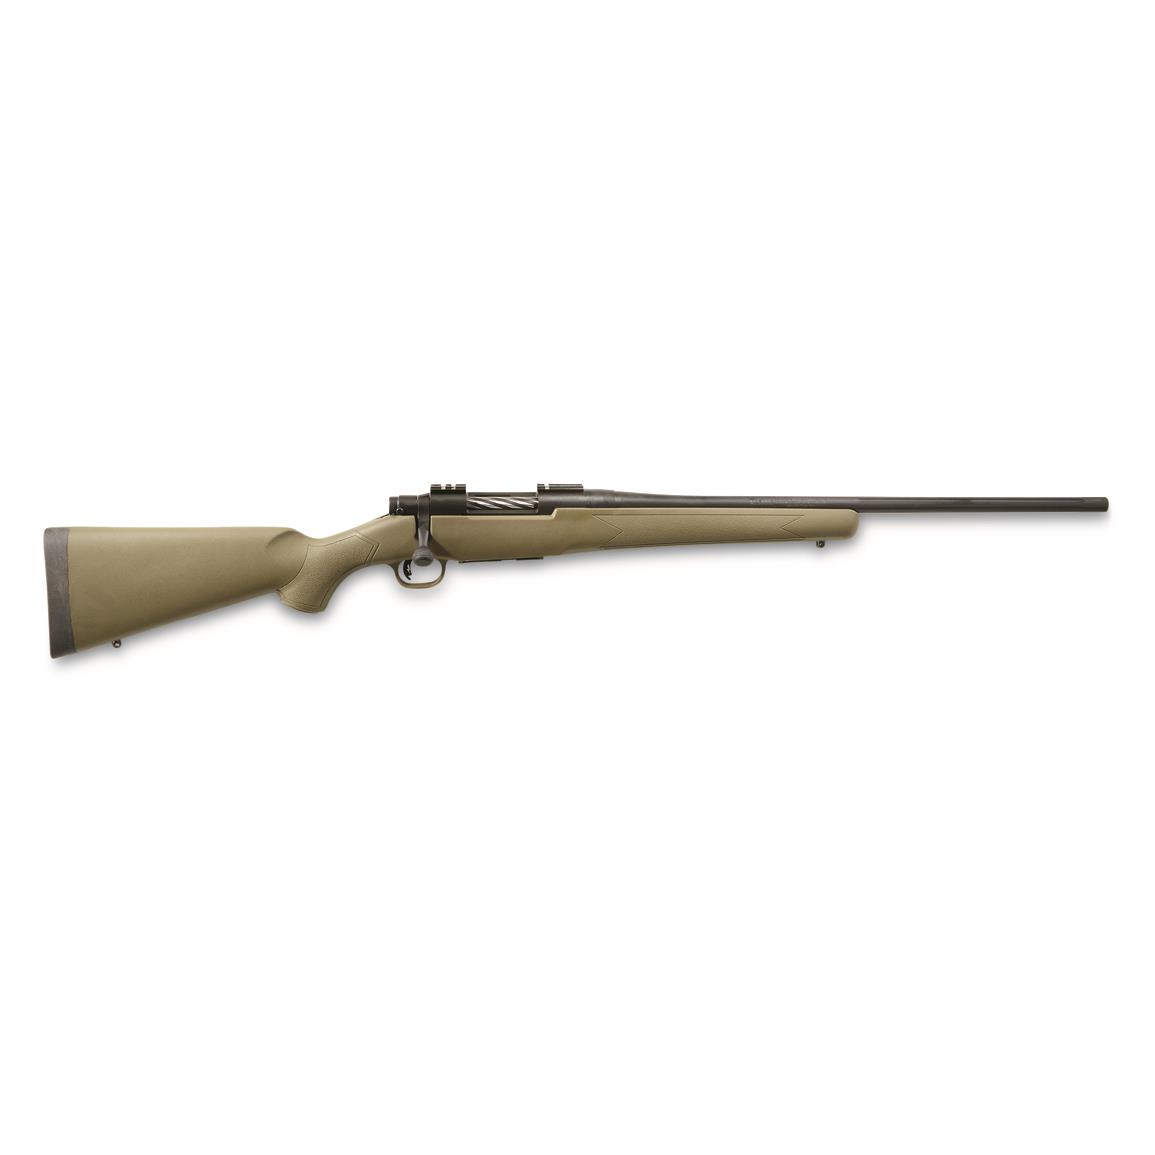 Mossberg Patriot, Bolt Action, .308 Winchester, 22" Barrel, Moss Green Synthetic Stock, 5+1 Rounds